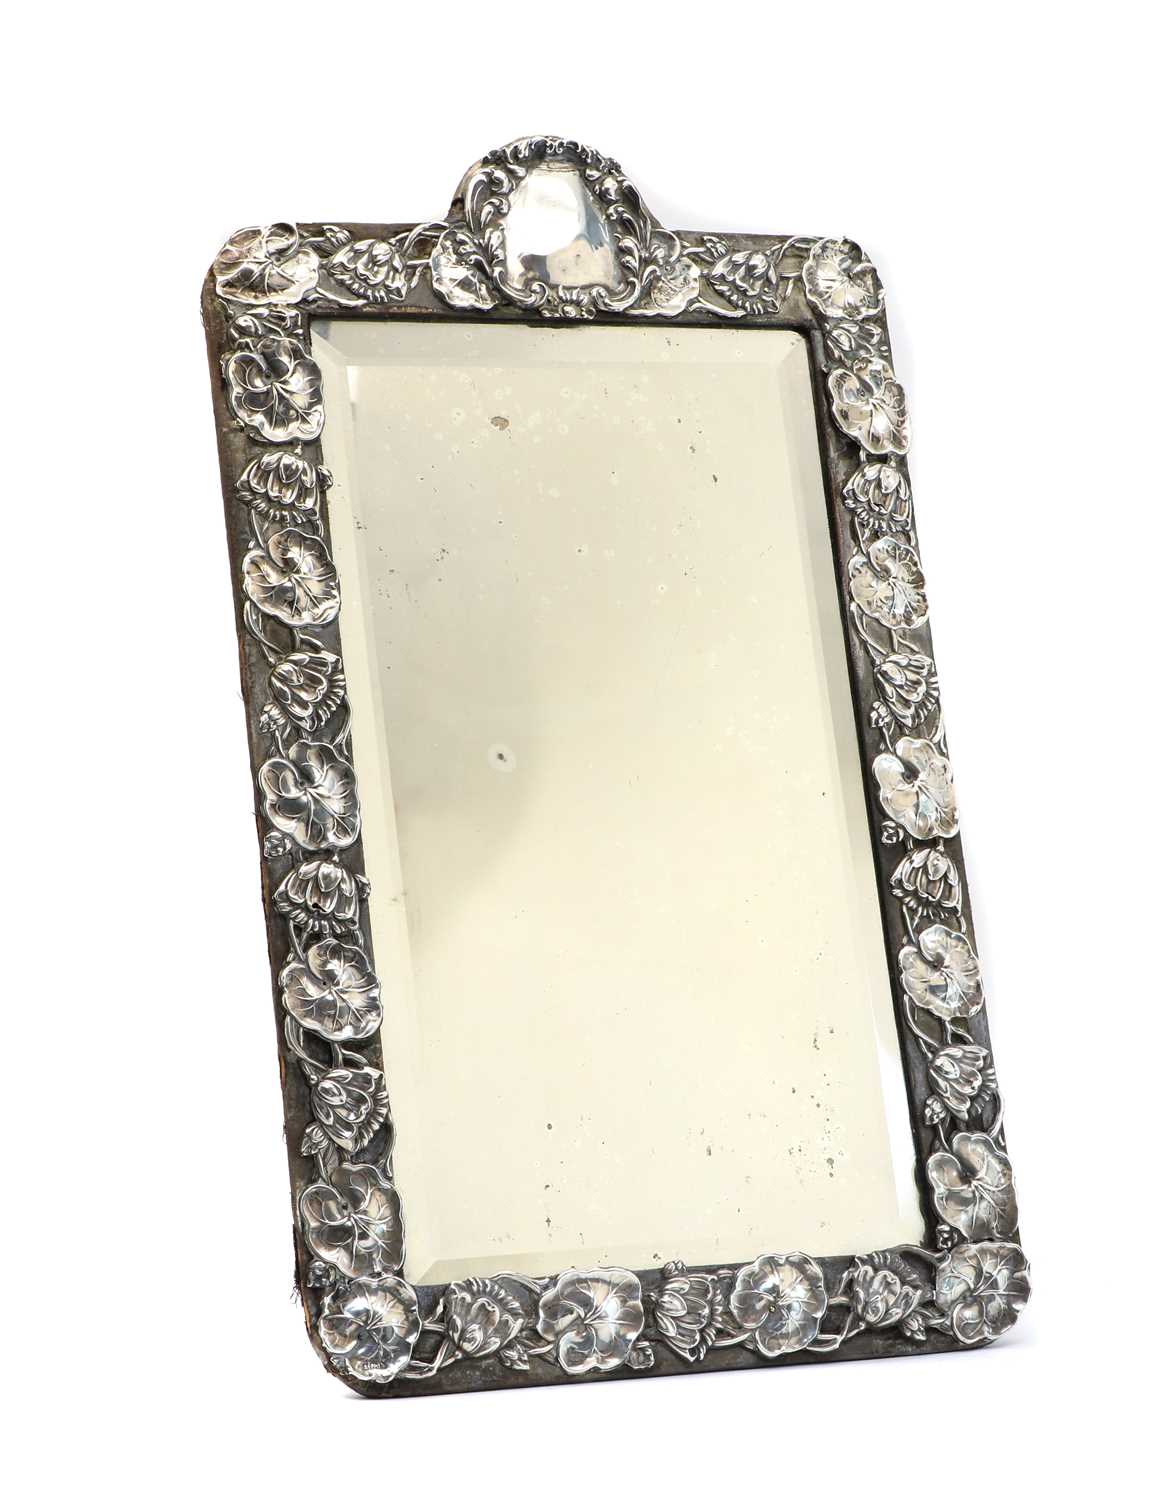 Lot 22 - An Edwardian silver-mounted table mirror